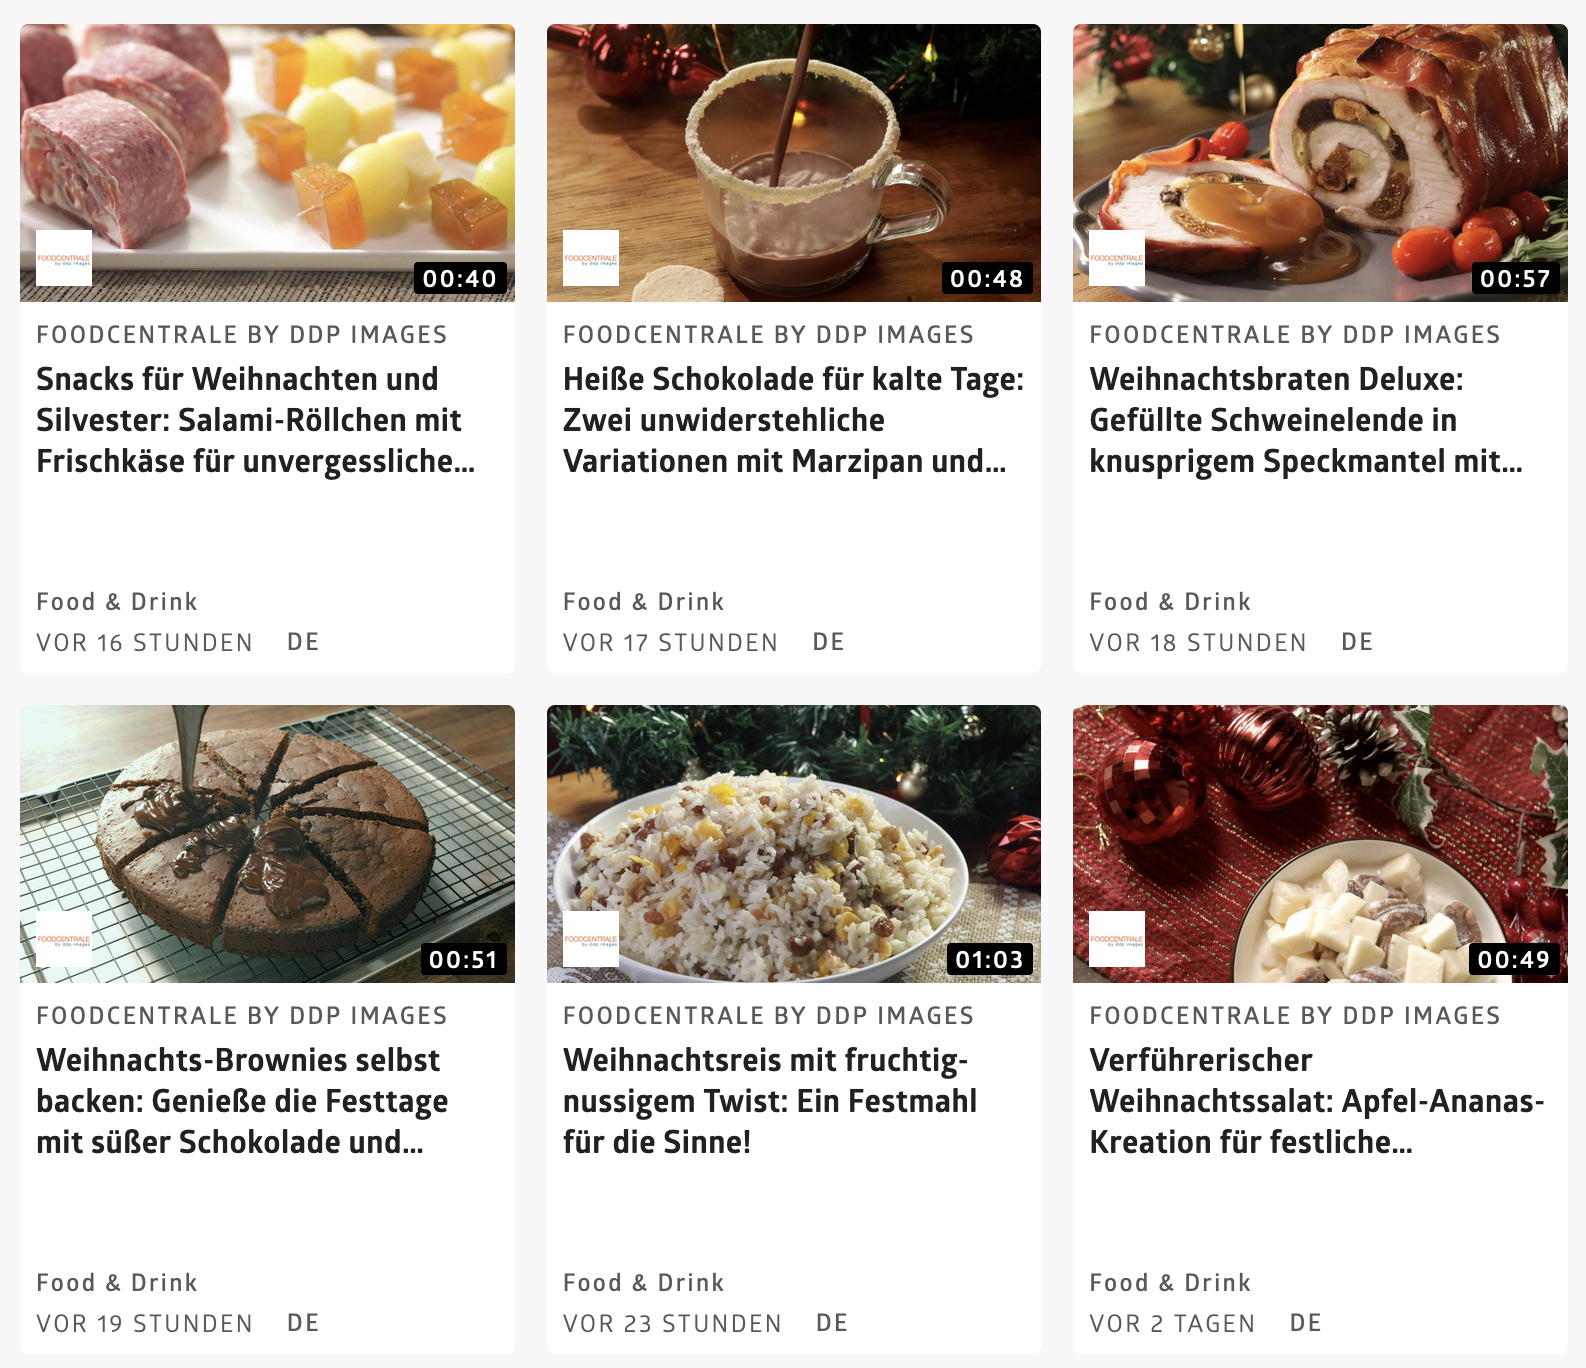 New at FoodCentrale: Recipe Videos for Online Media – also available via glomex